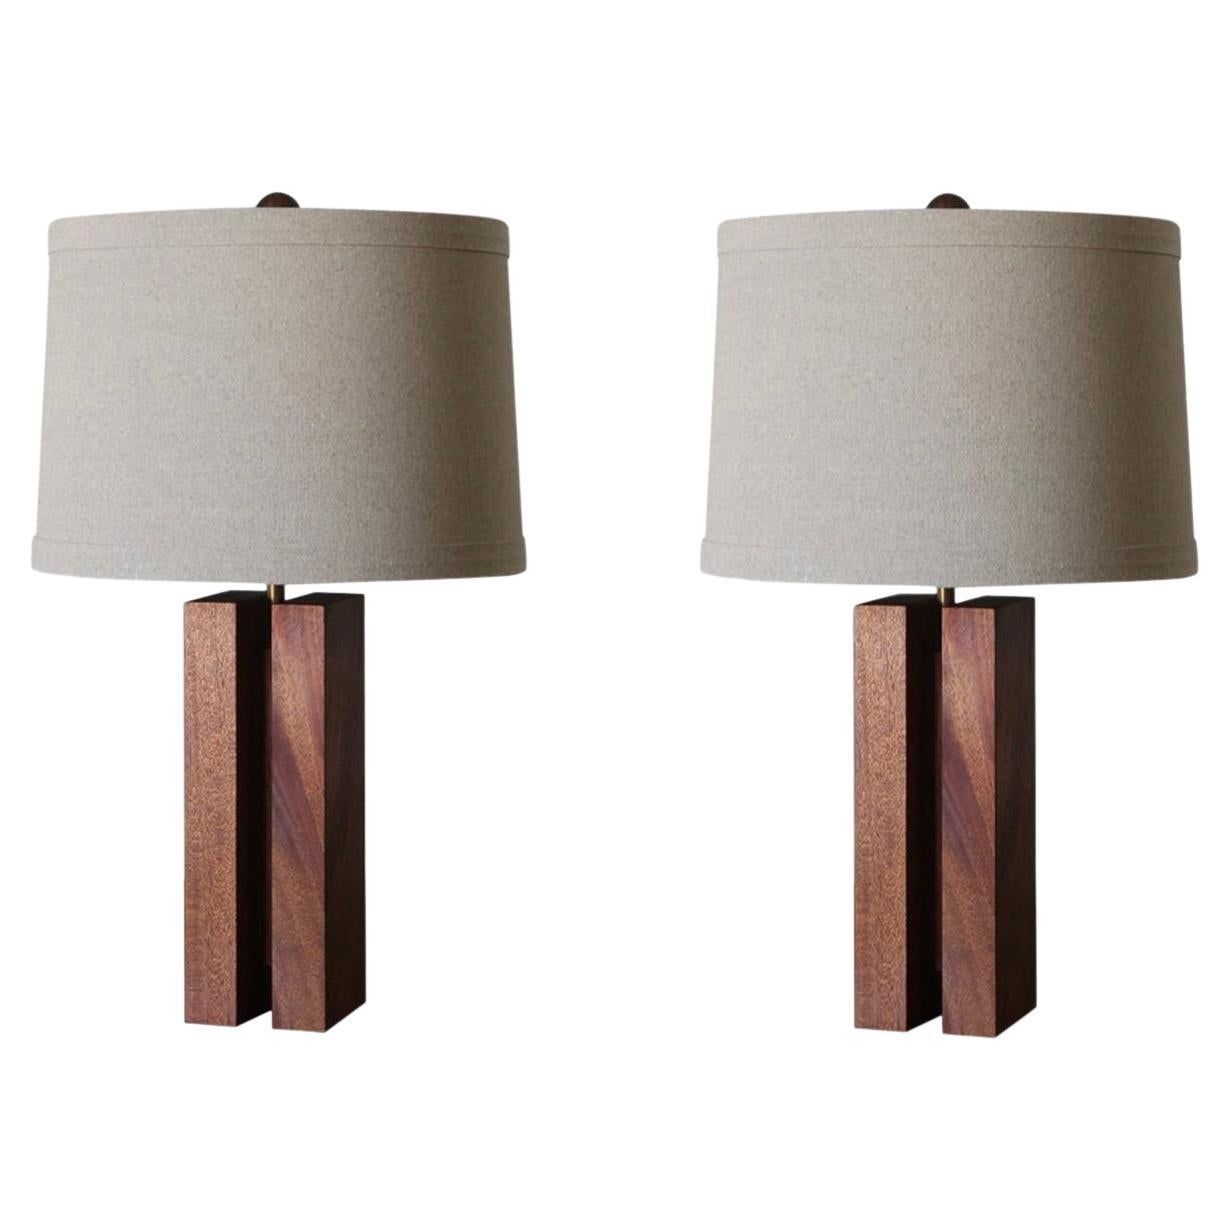 Pair of Chic Large ‘Cubismo’ Lamp with linen shade by Understated Design